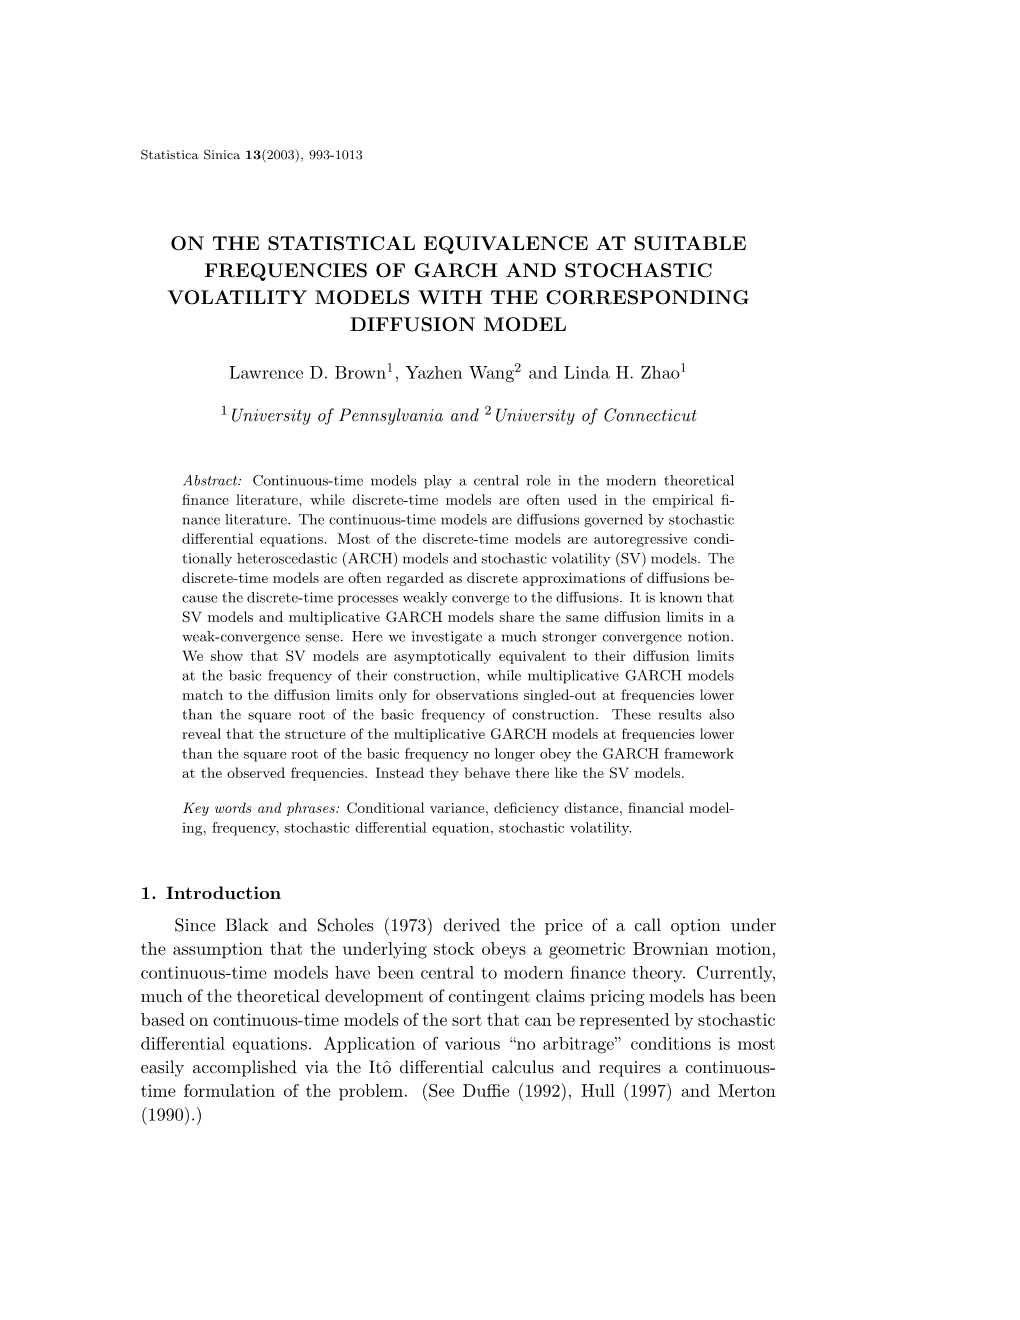 Statistical Equivalence at Suitable Frequencies of Garch and Stochastic Volatility Models with the Corresponding Diffusion Model